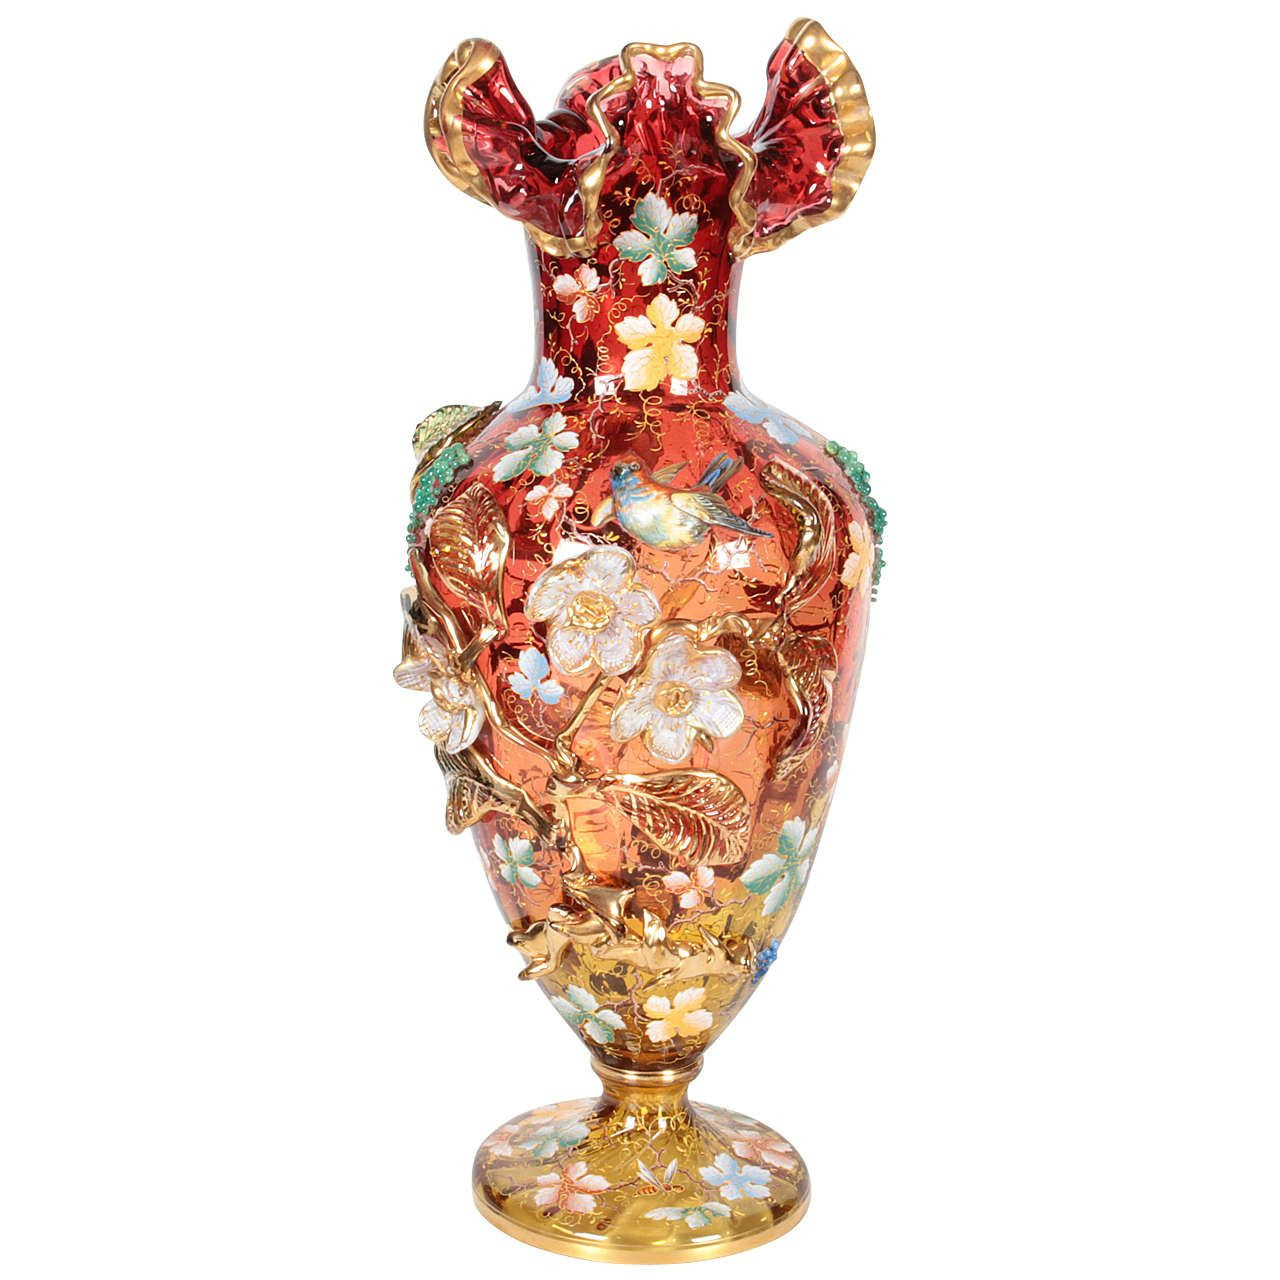 15 Unique Red Crystal Vase 2024 free download red crystal vase of moser glass amberina red vase with raised flowers leaves jewels in moser glass amberina red vase with raised flowers leaves jewels and bird from a unique collection of an